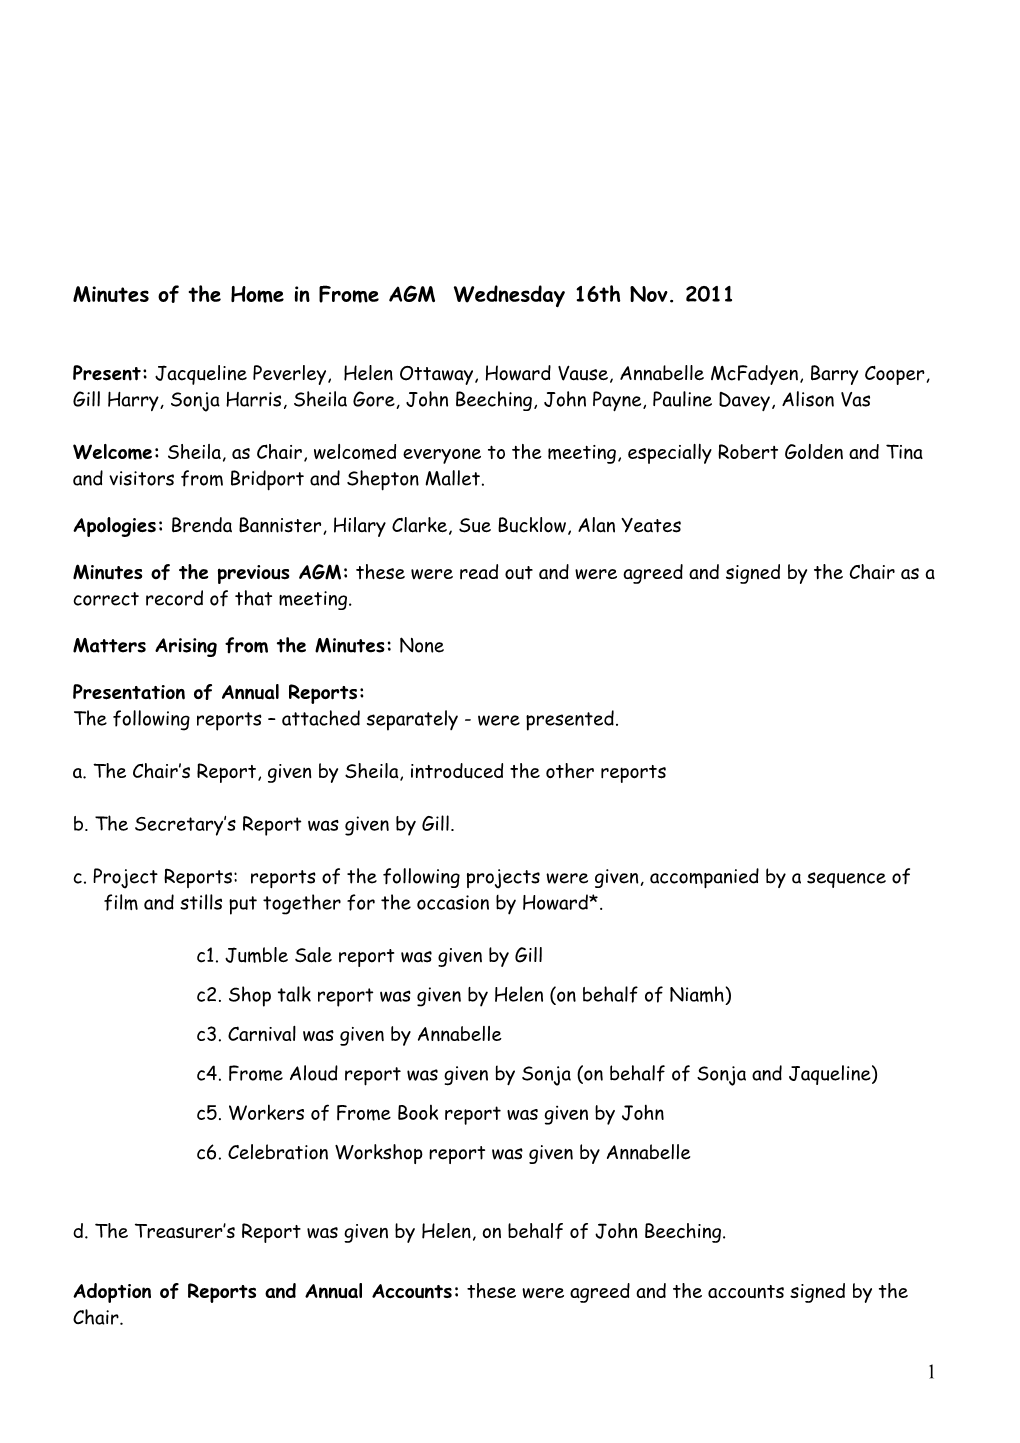 Minutes of the Home in Frome AGM Wednesday 16Th Nov. 2011